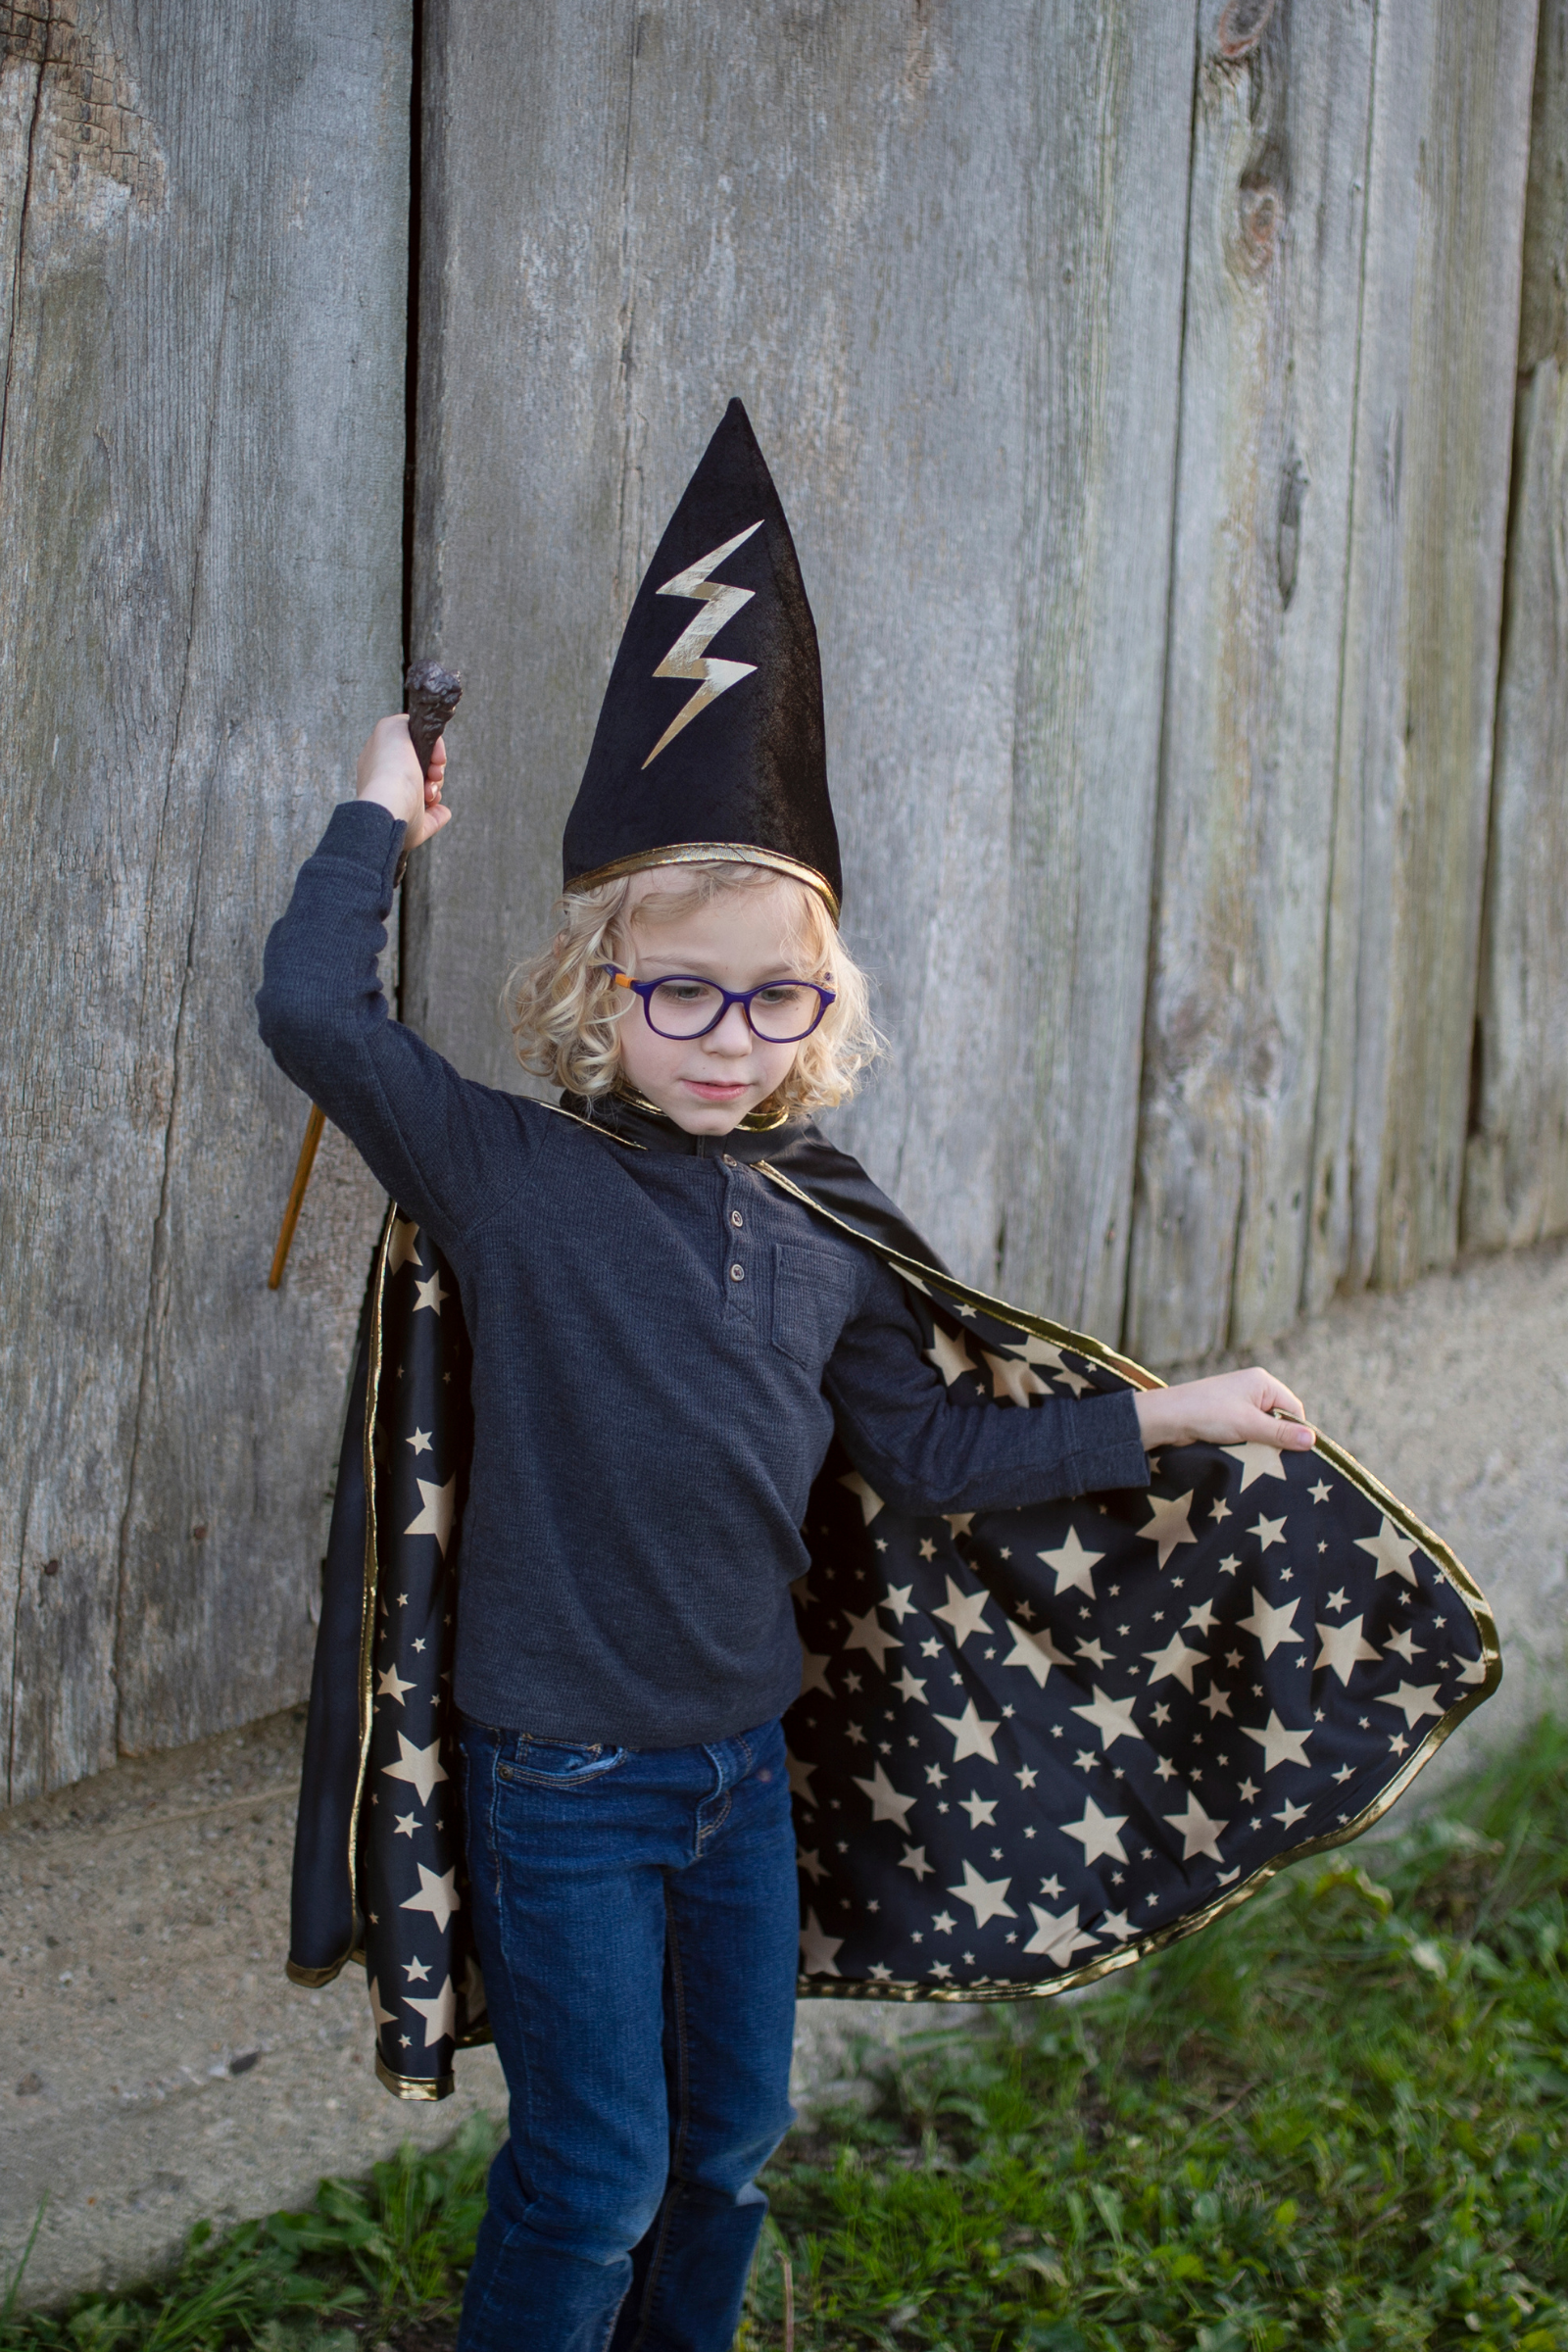 Reversible Wizard Cape and Hat